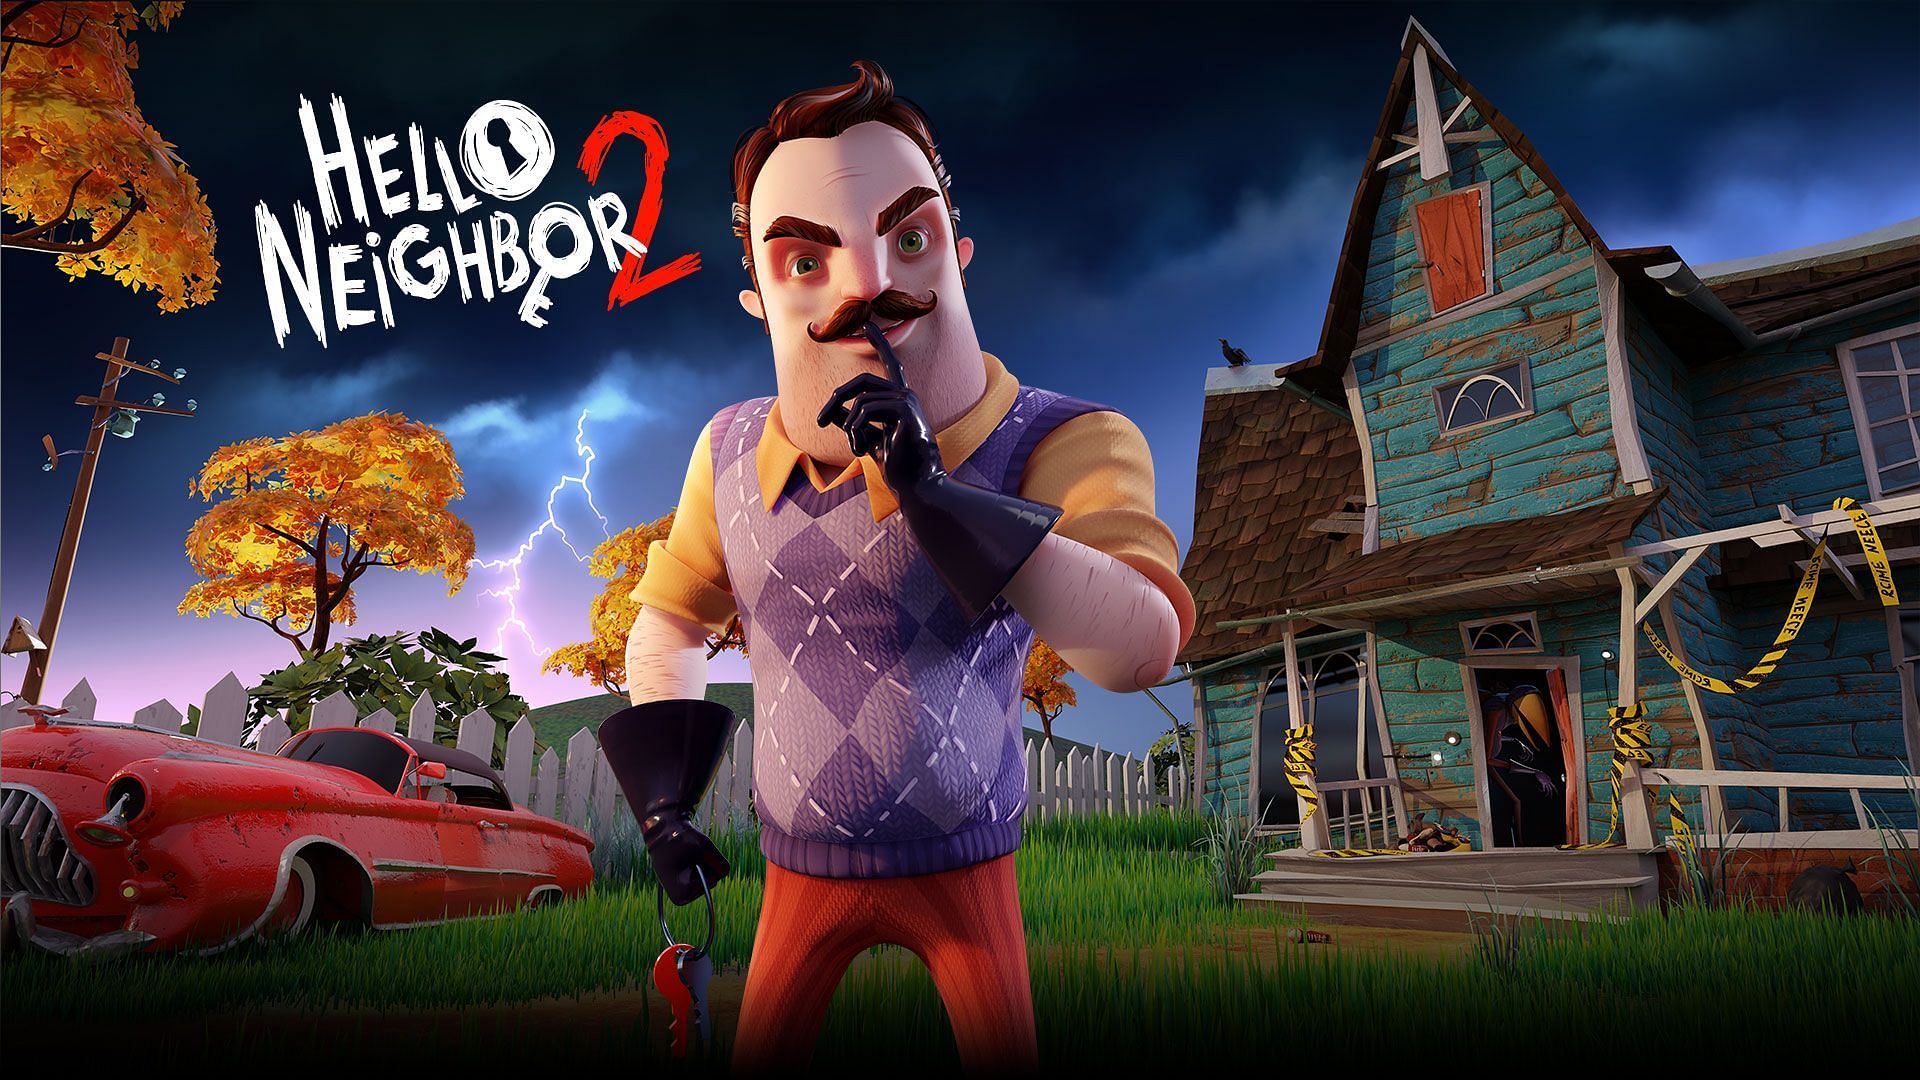 What platforms will Hello Neighbor 2 be on?